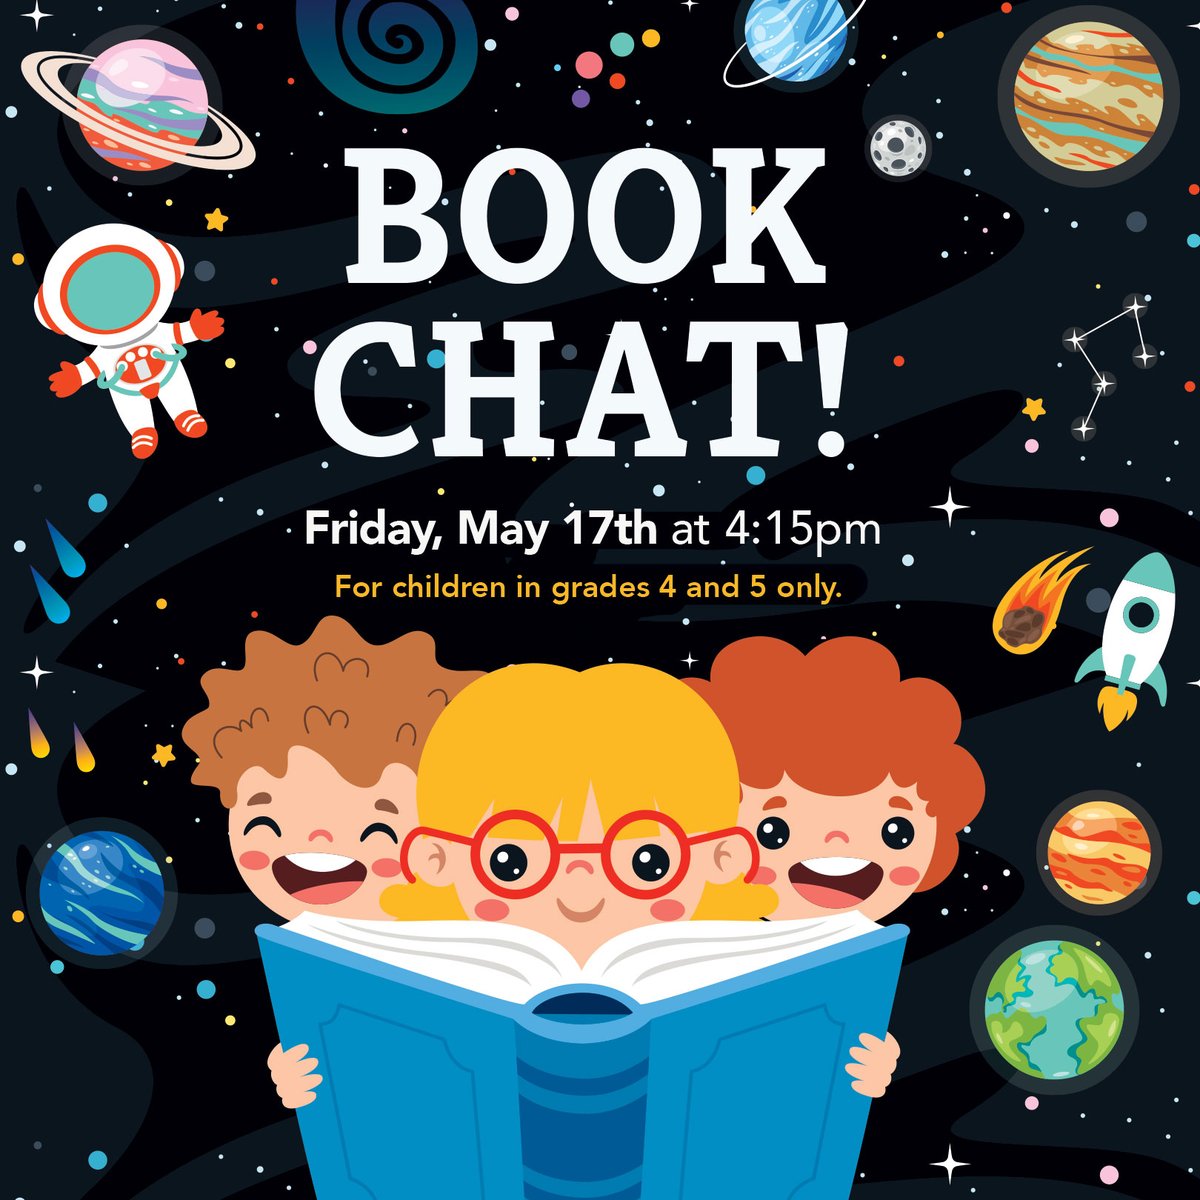 Join us for a book discussion and a snack! Visit our website to register. Please email amacci@henhudfreelibrary.org upon registering for your free copy of the book!

#bookchat #mabuahy #zacharysterling #reading #hhﬂ  #librariesrock